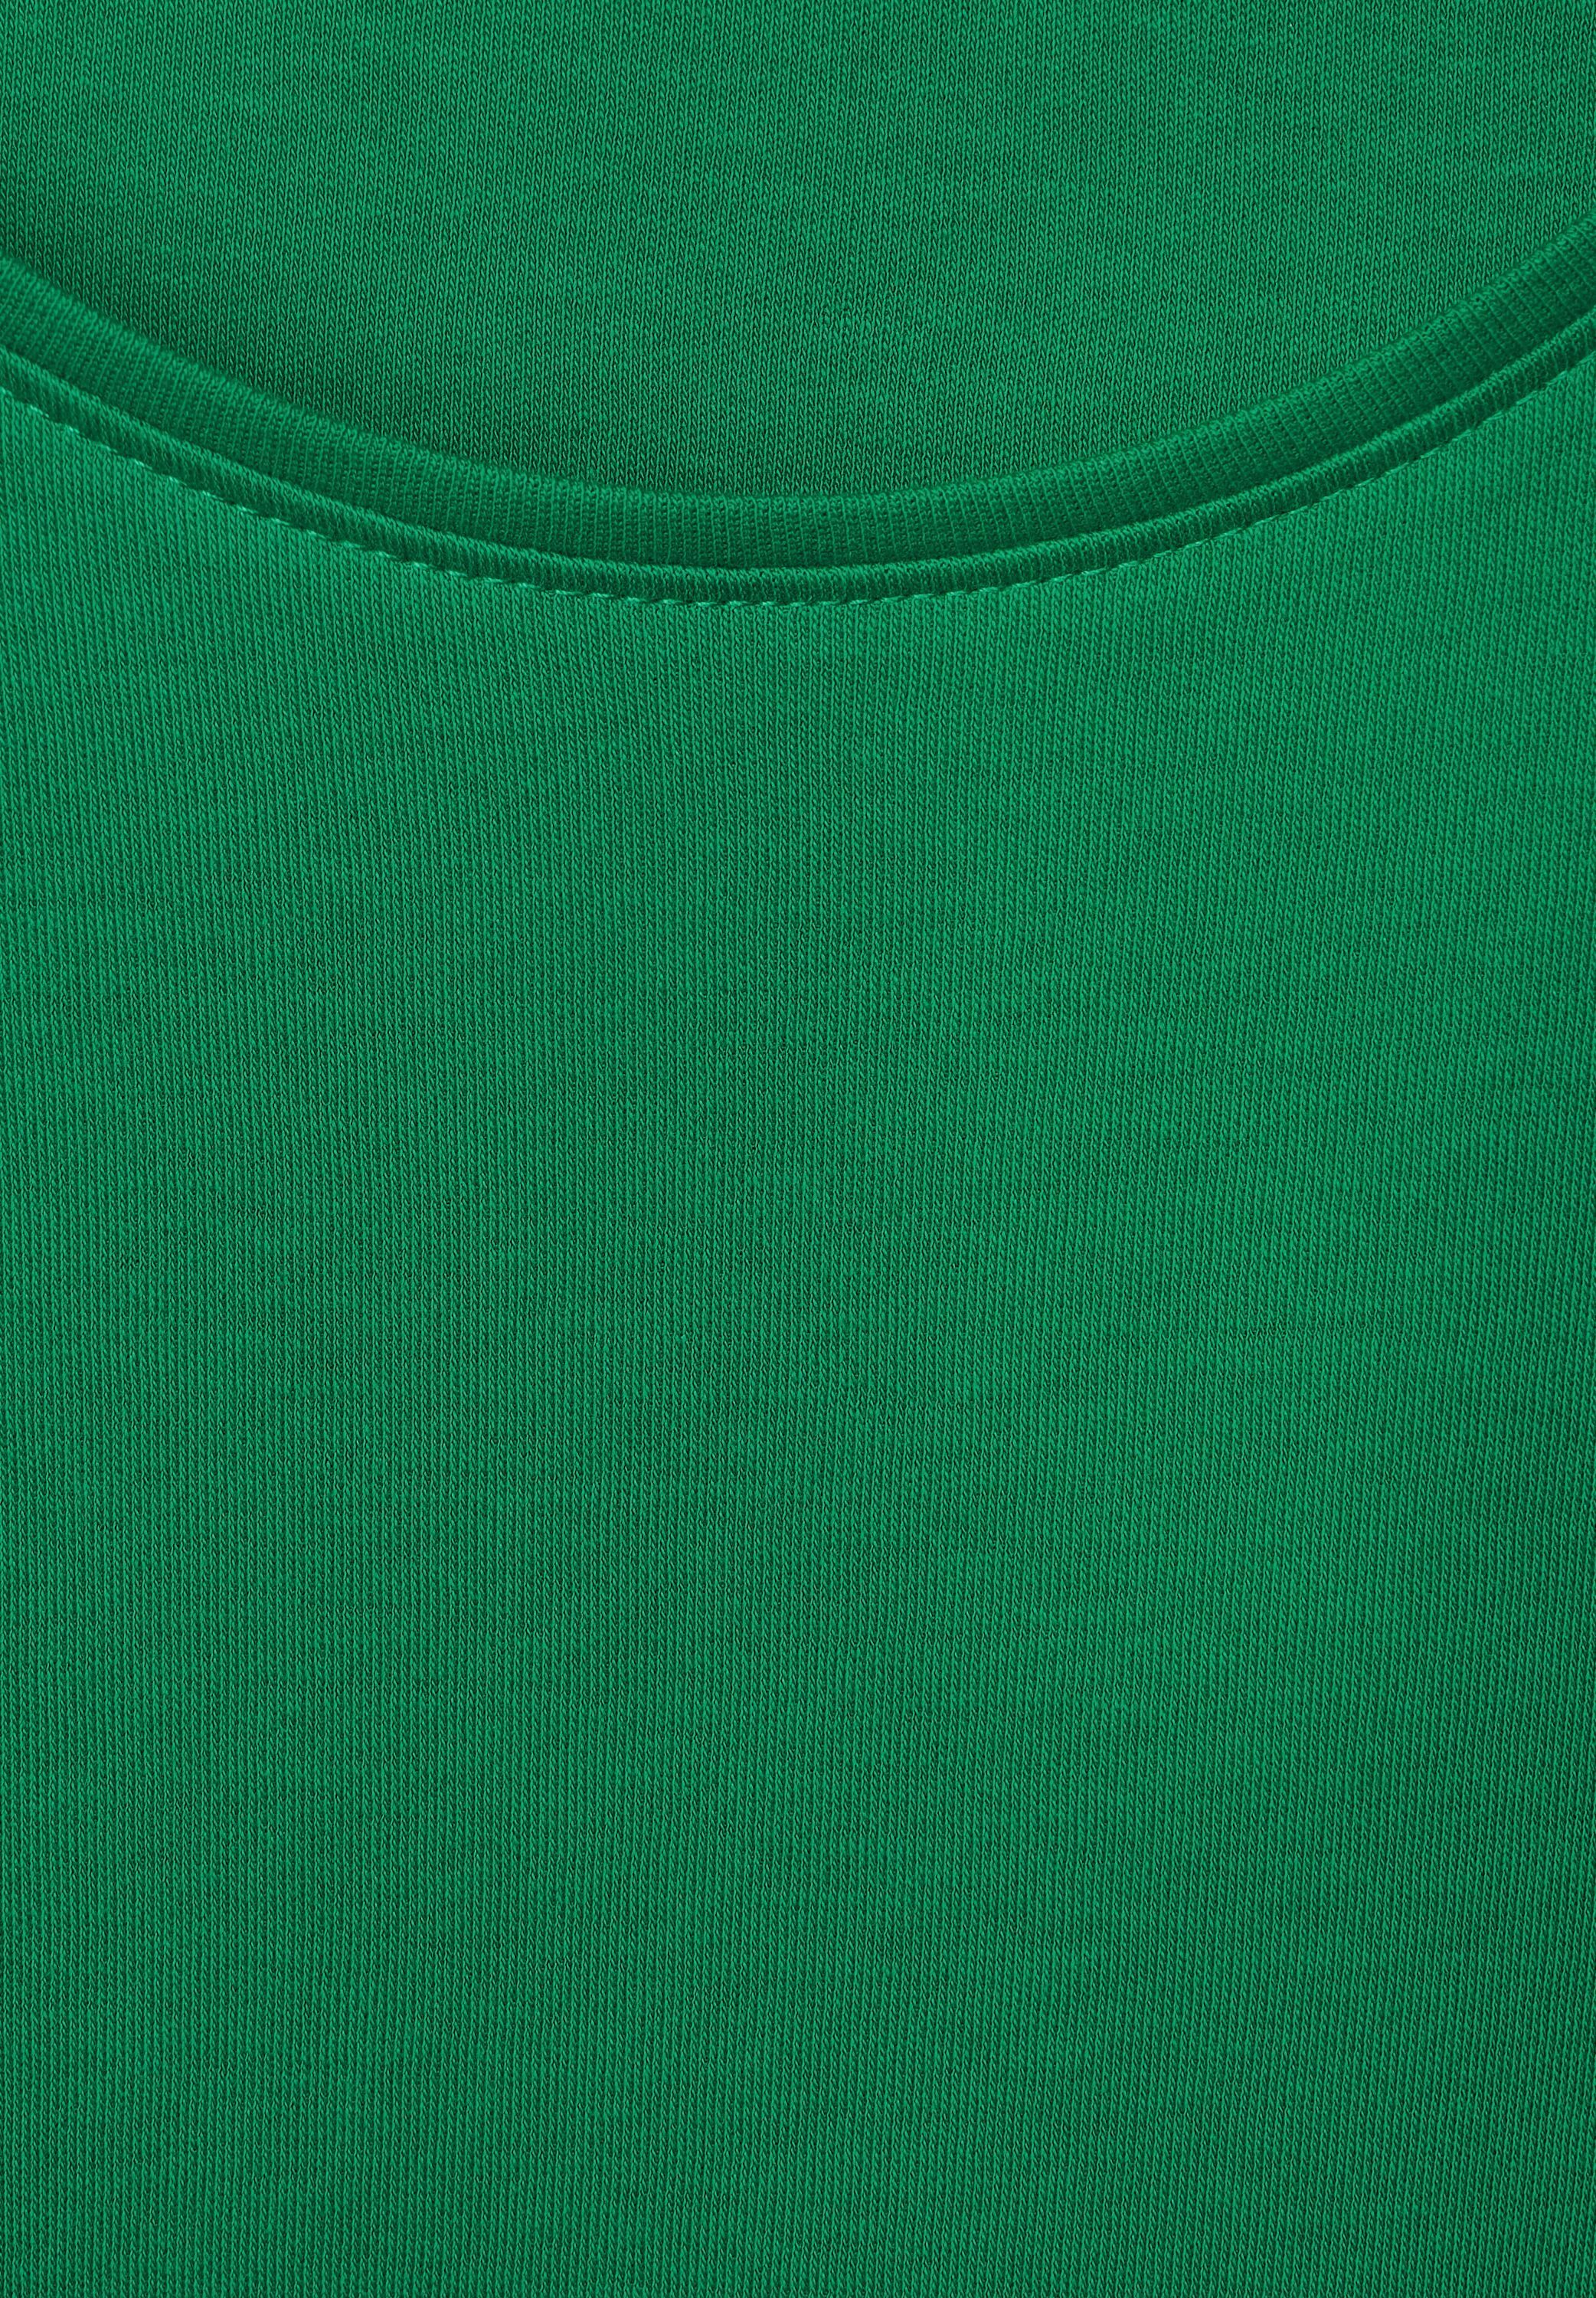 Cecil T-Shirt green Unifarbe easy in